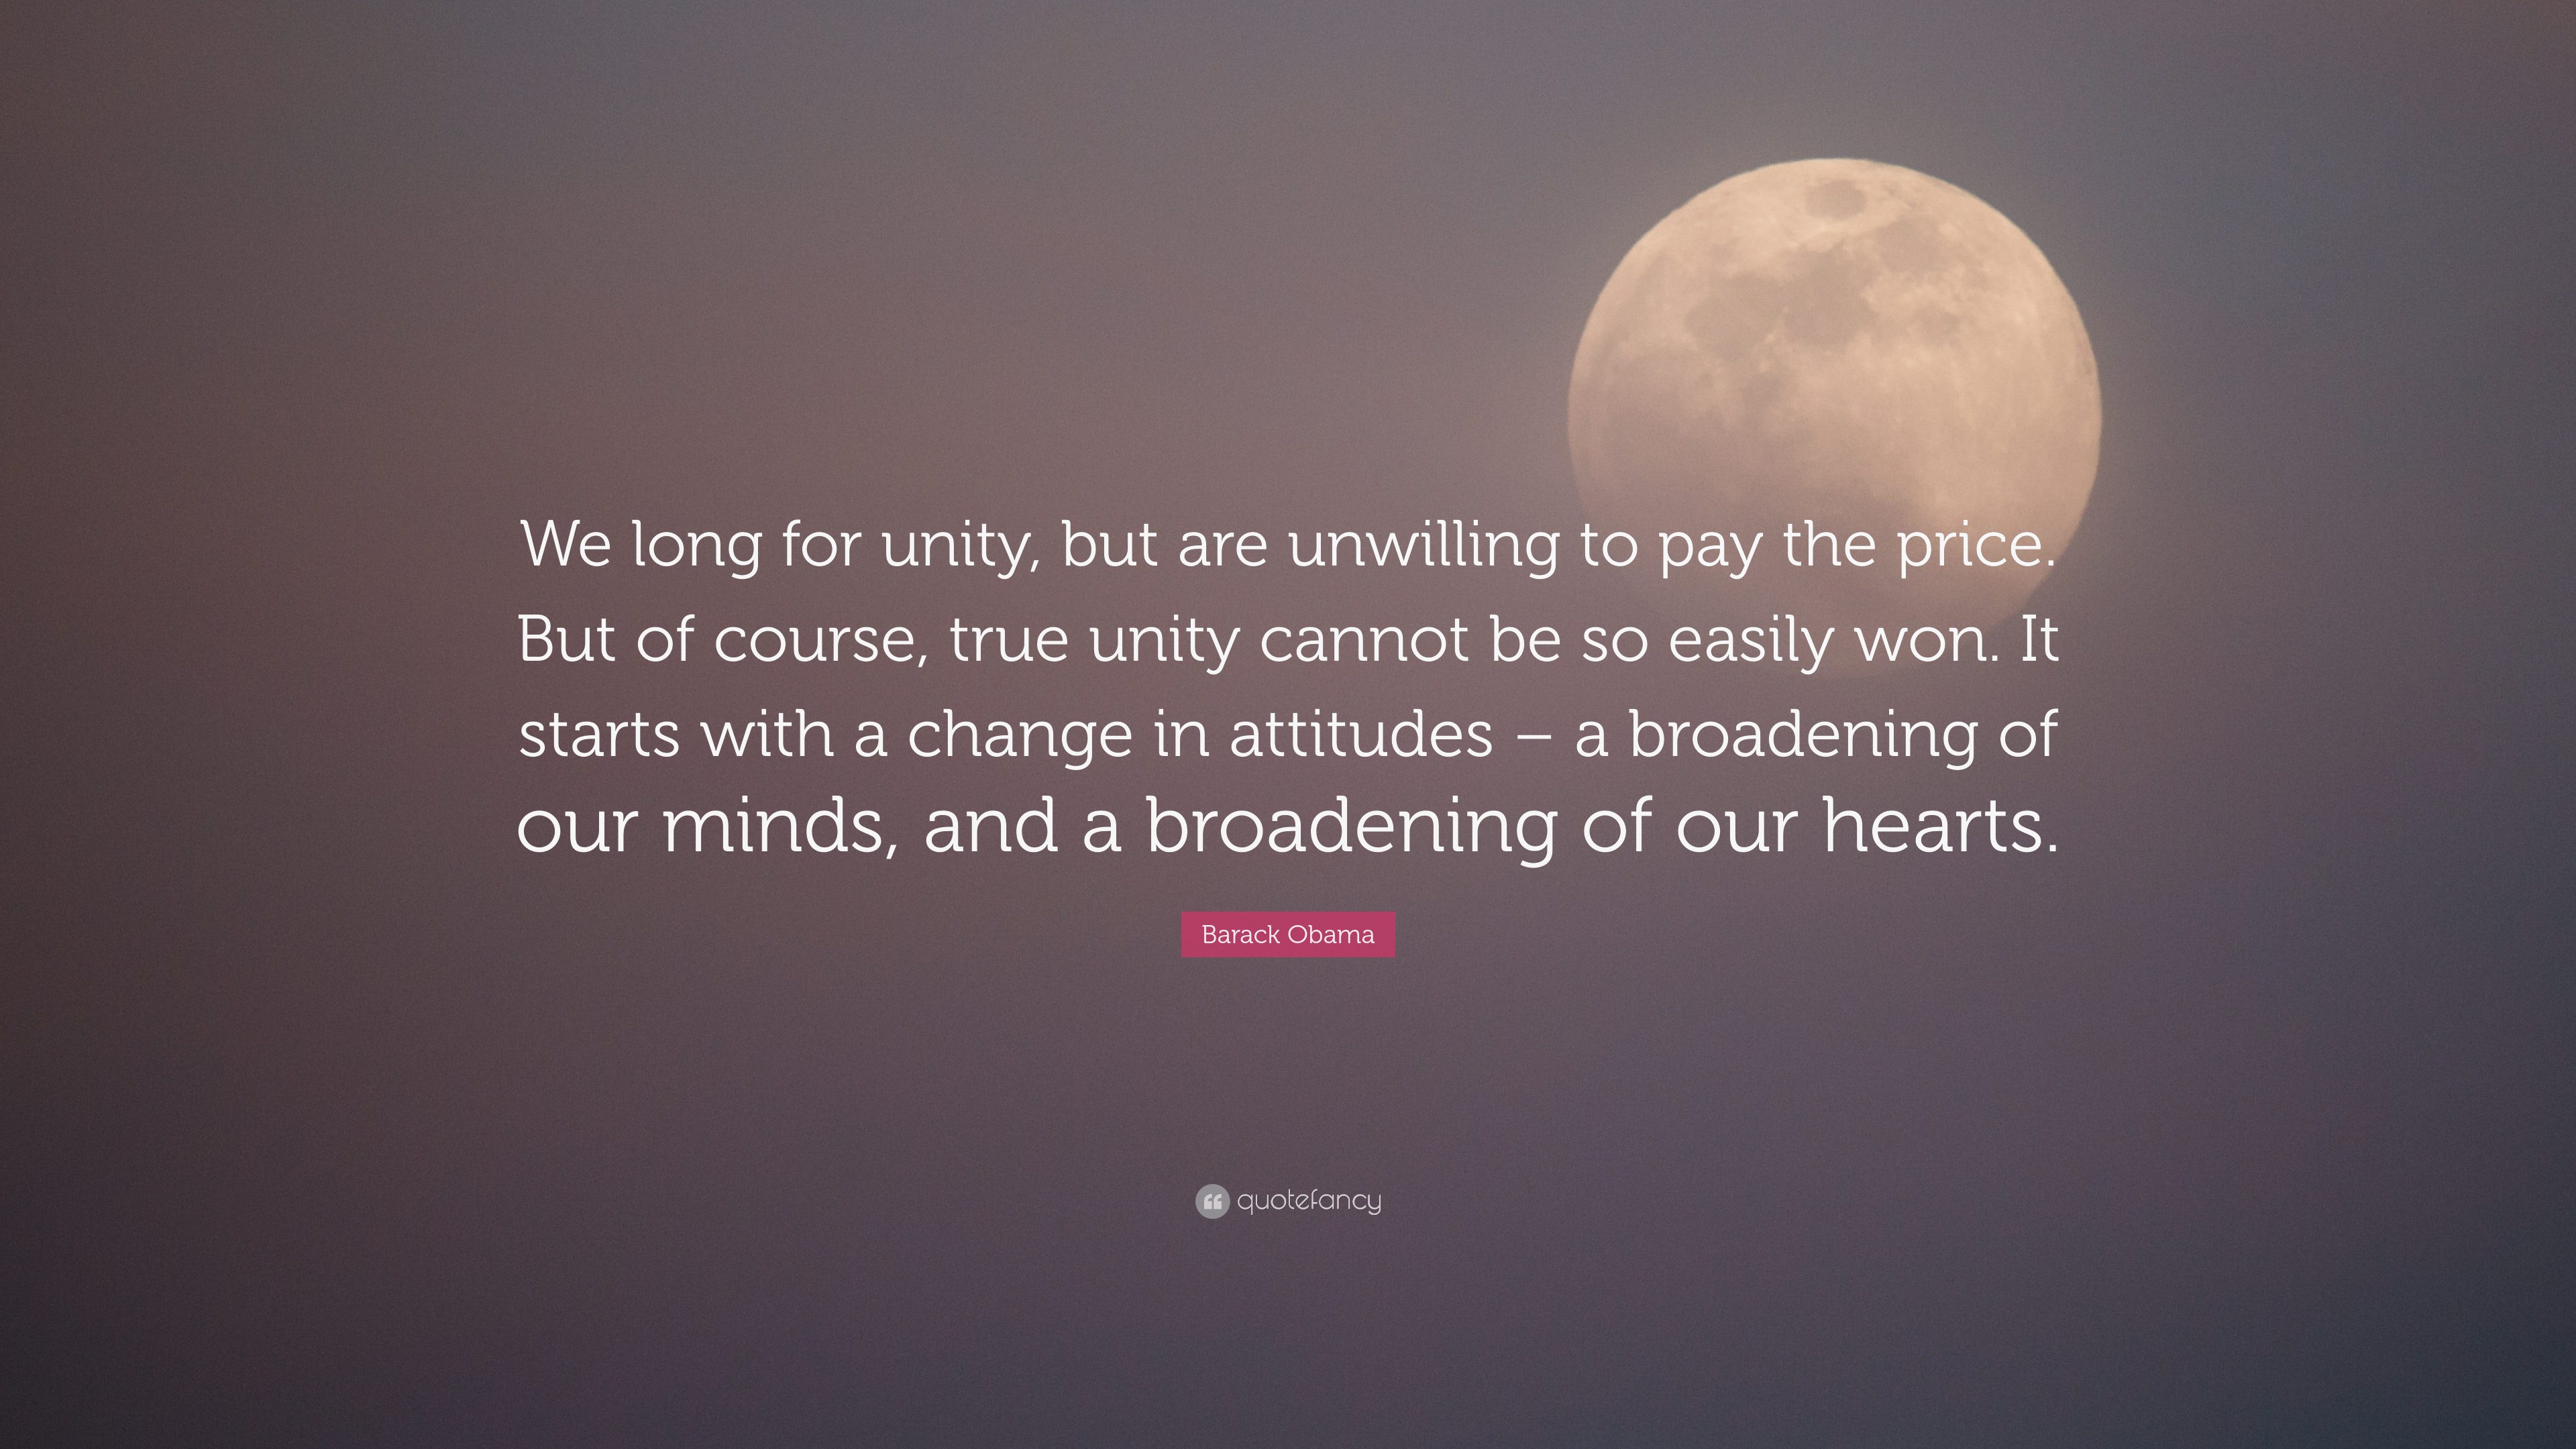 Barack Obama Quote: “We long for unity, but are unwilling to pay the